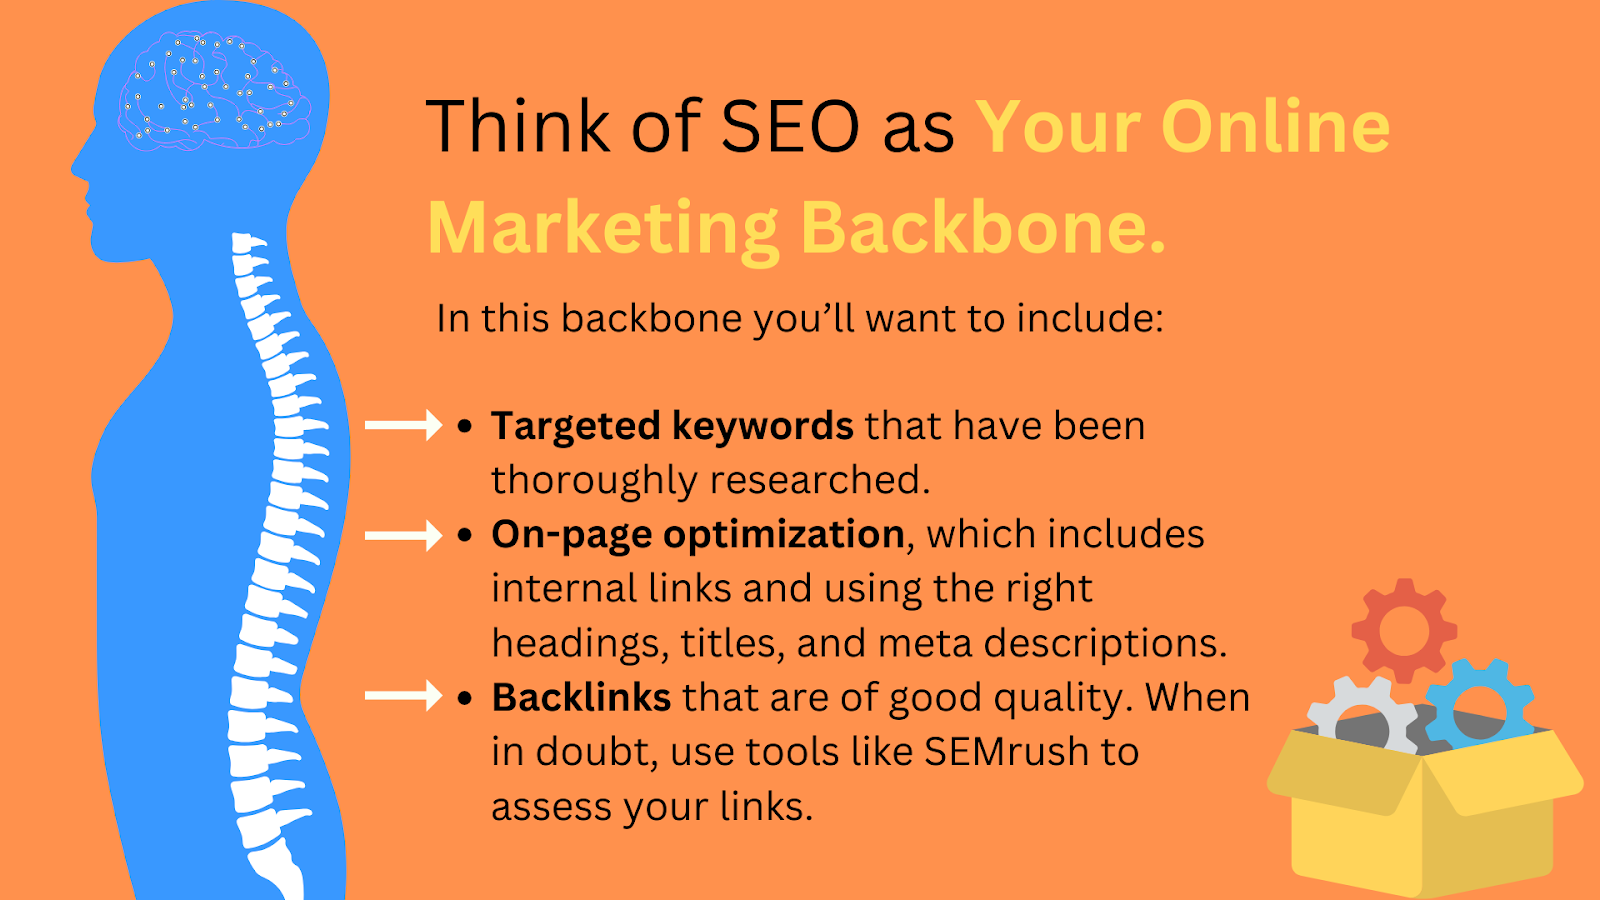 Technical SEO for SaaS businesses - scrutinize your strategy… hard. You need to think of SEO as your online marketing backbone with targeted keywords, on-page optimization, and backlinks. Read the full SaaS marketing audit 101 guide for the other 10 steps!